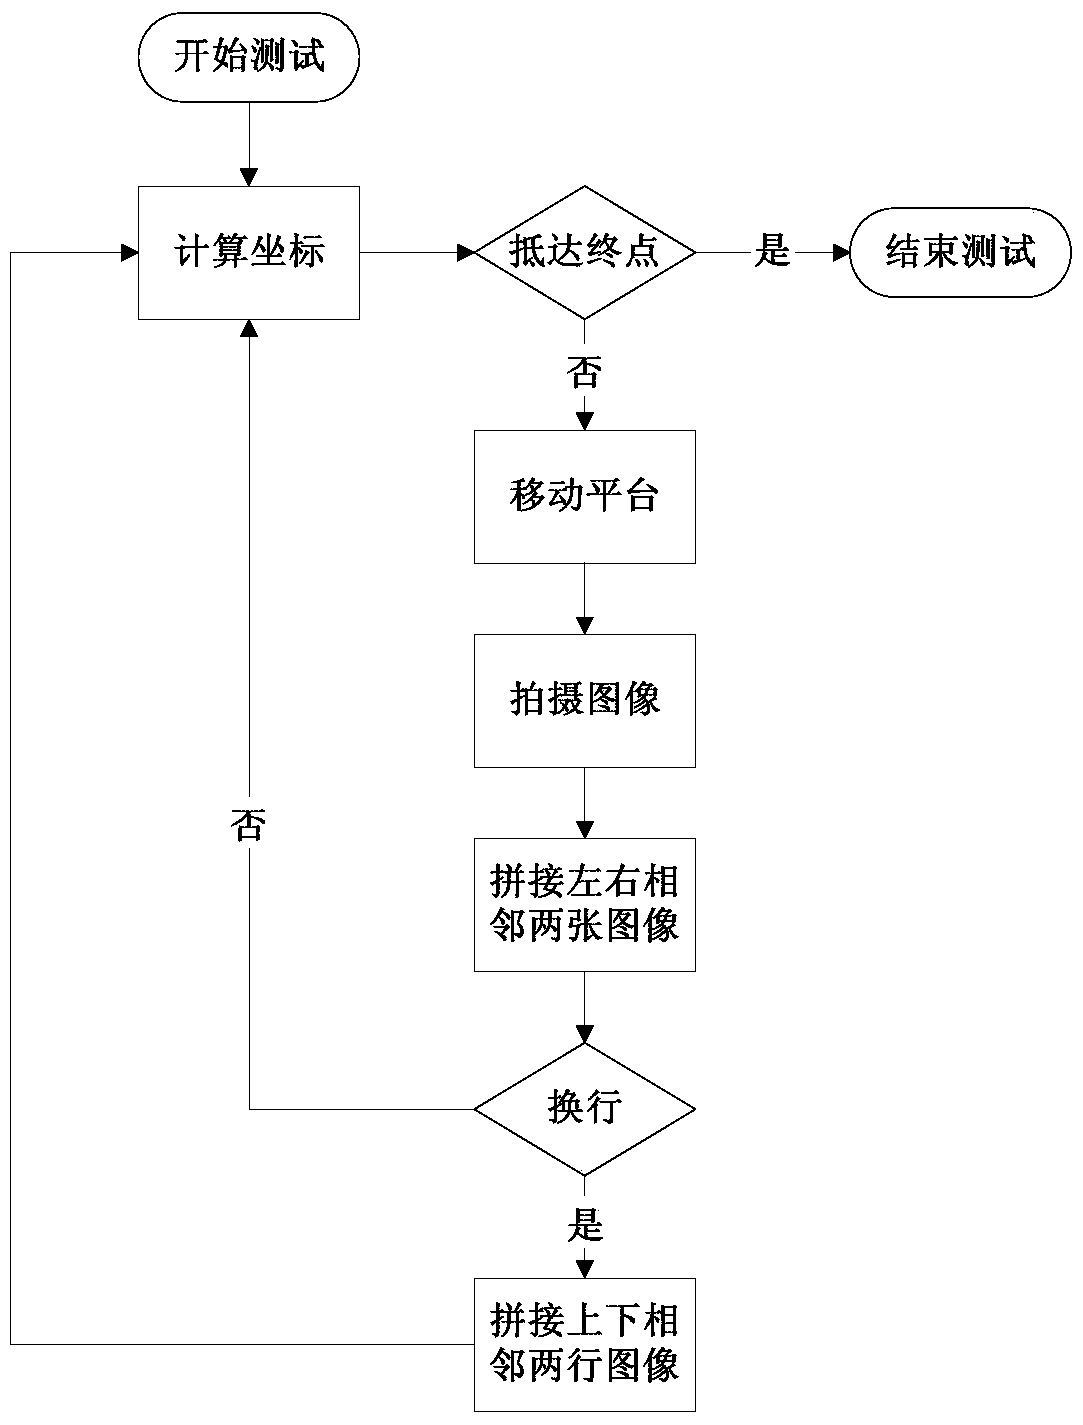 Dynamic Particle Image Particle Size Particle Shape Analyzer and Method with Scanning and Stitching